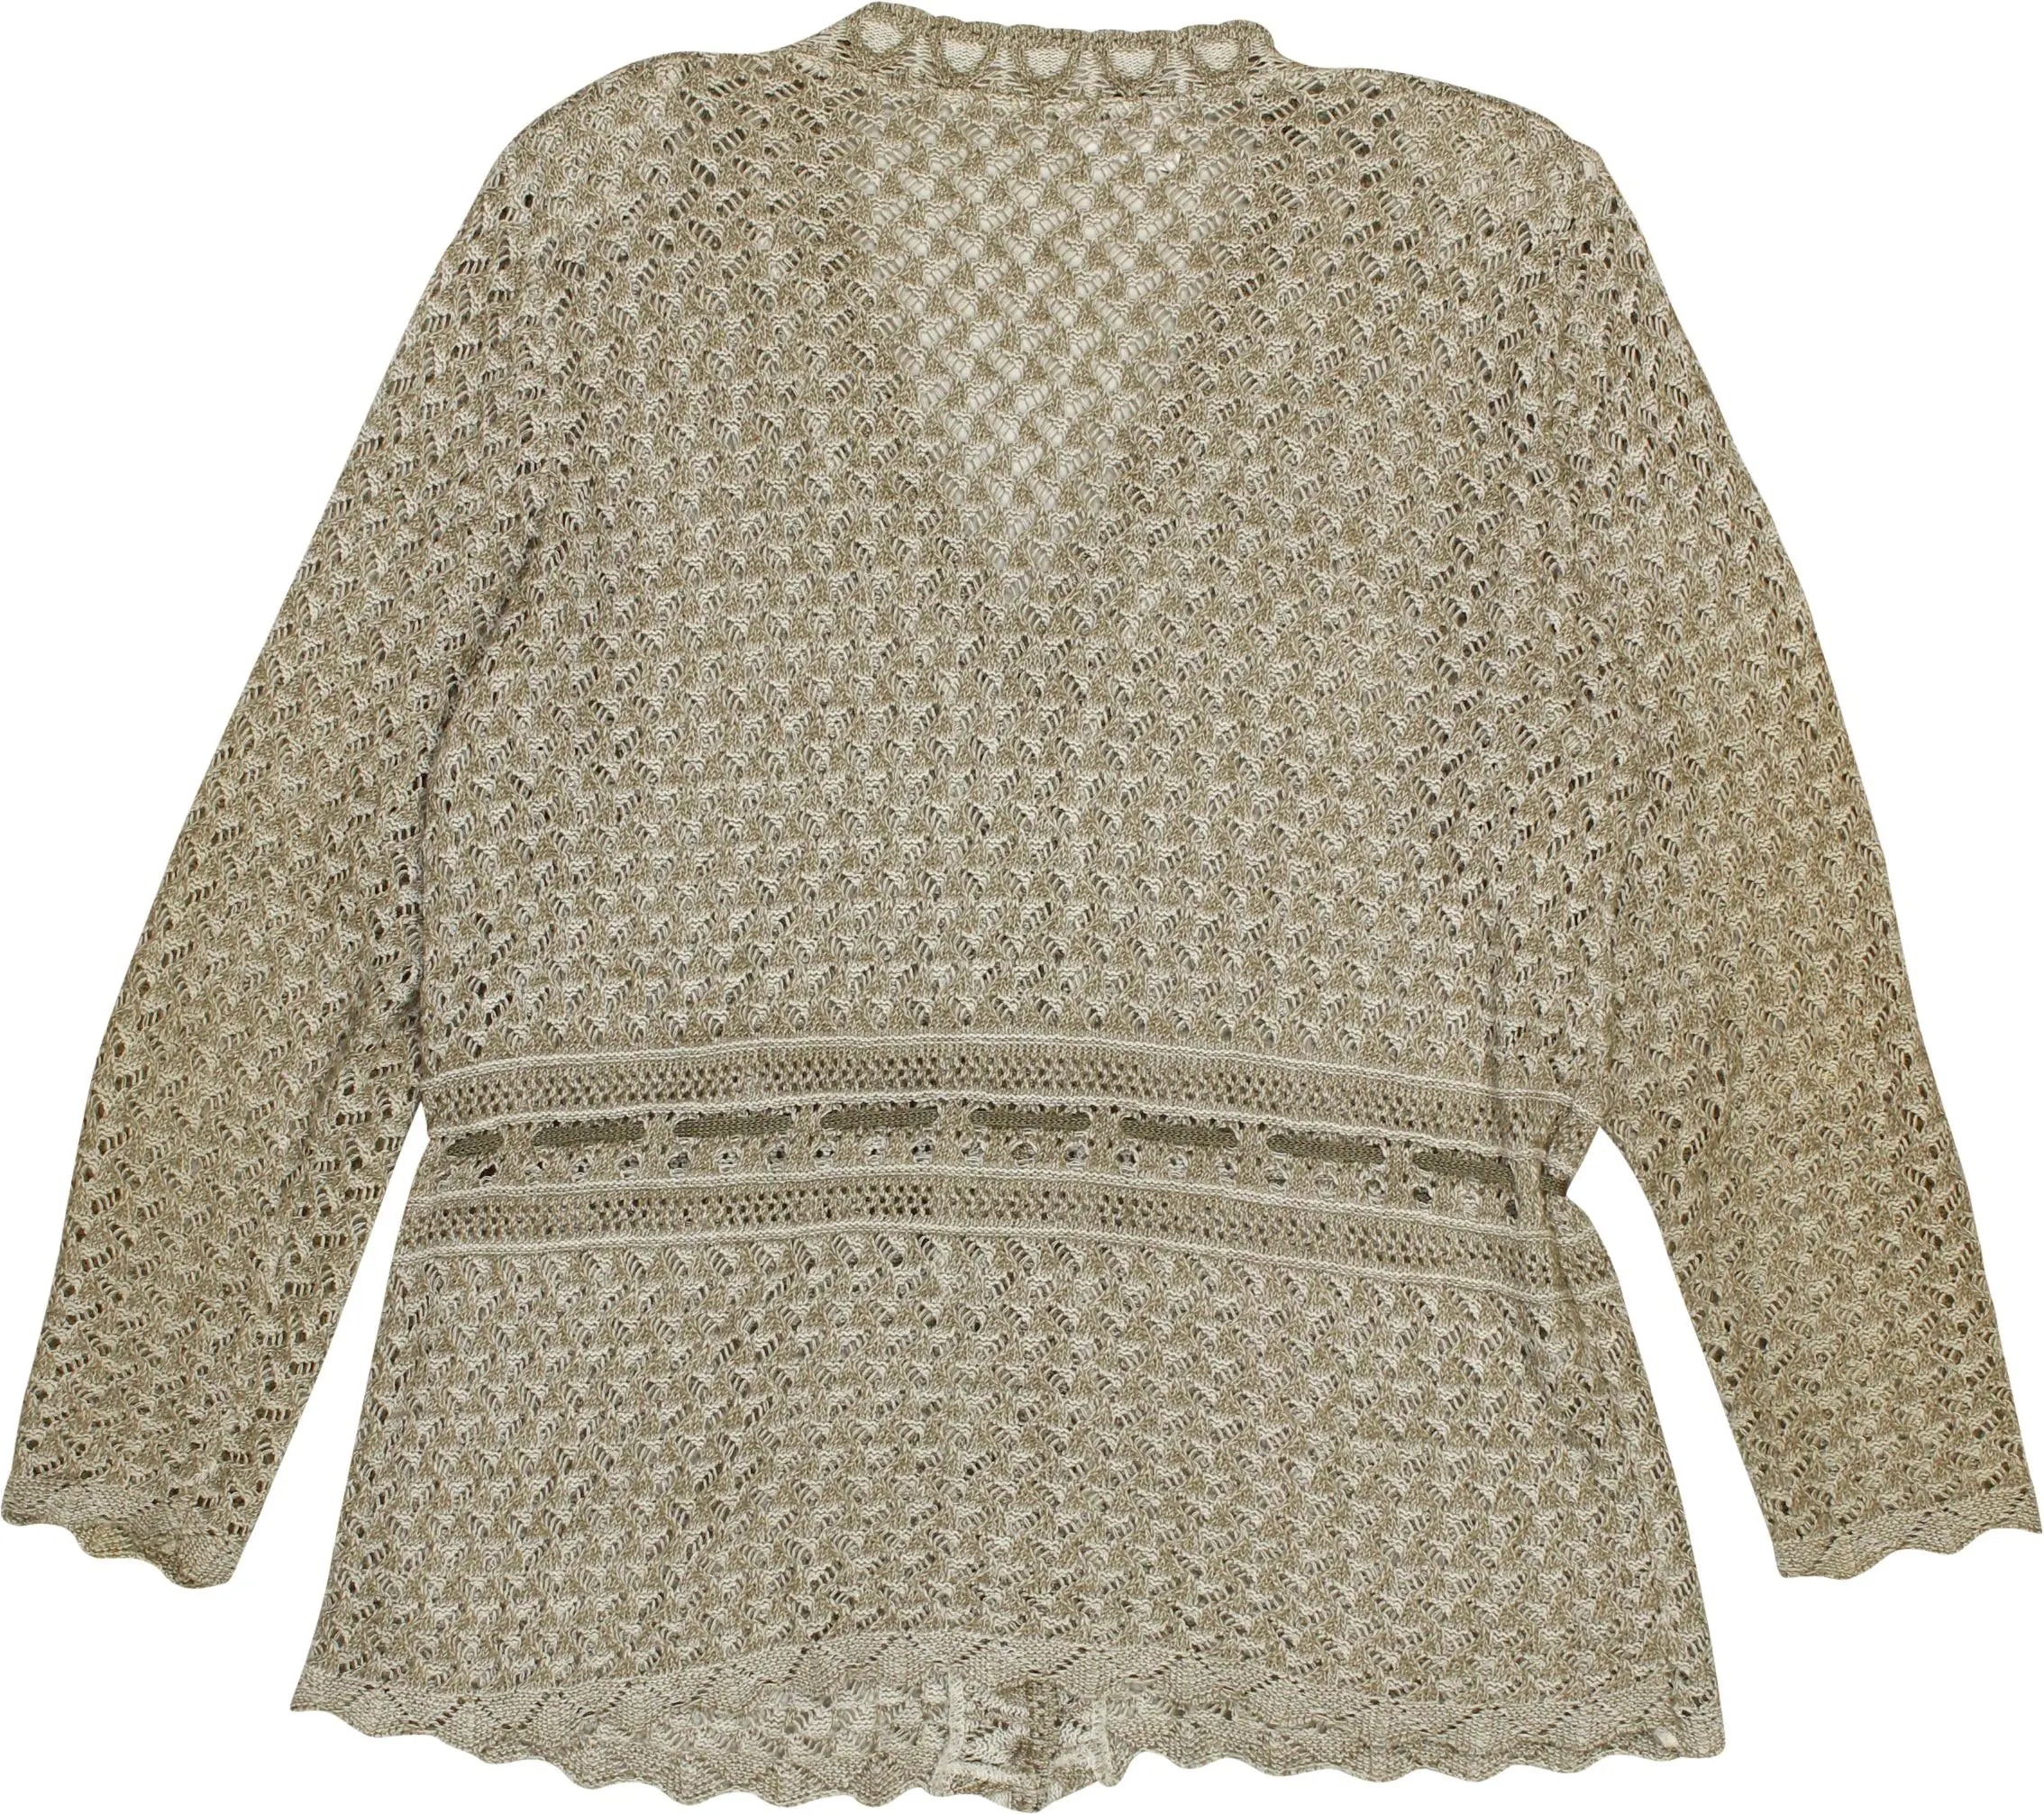 Unknown - Crochet Cardigan- ThriftTale.com - Vintage and second handclothing